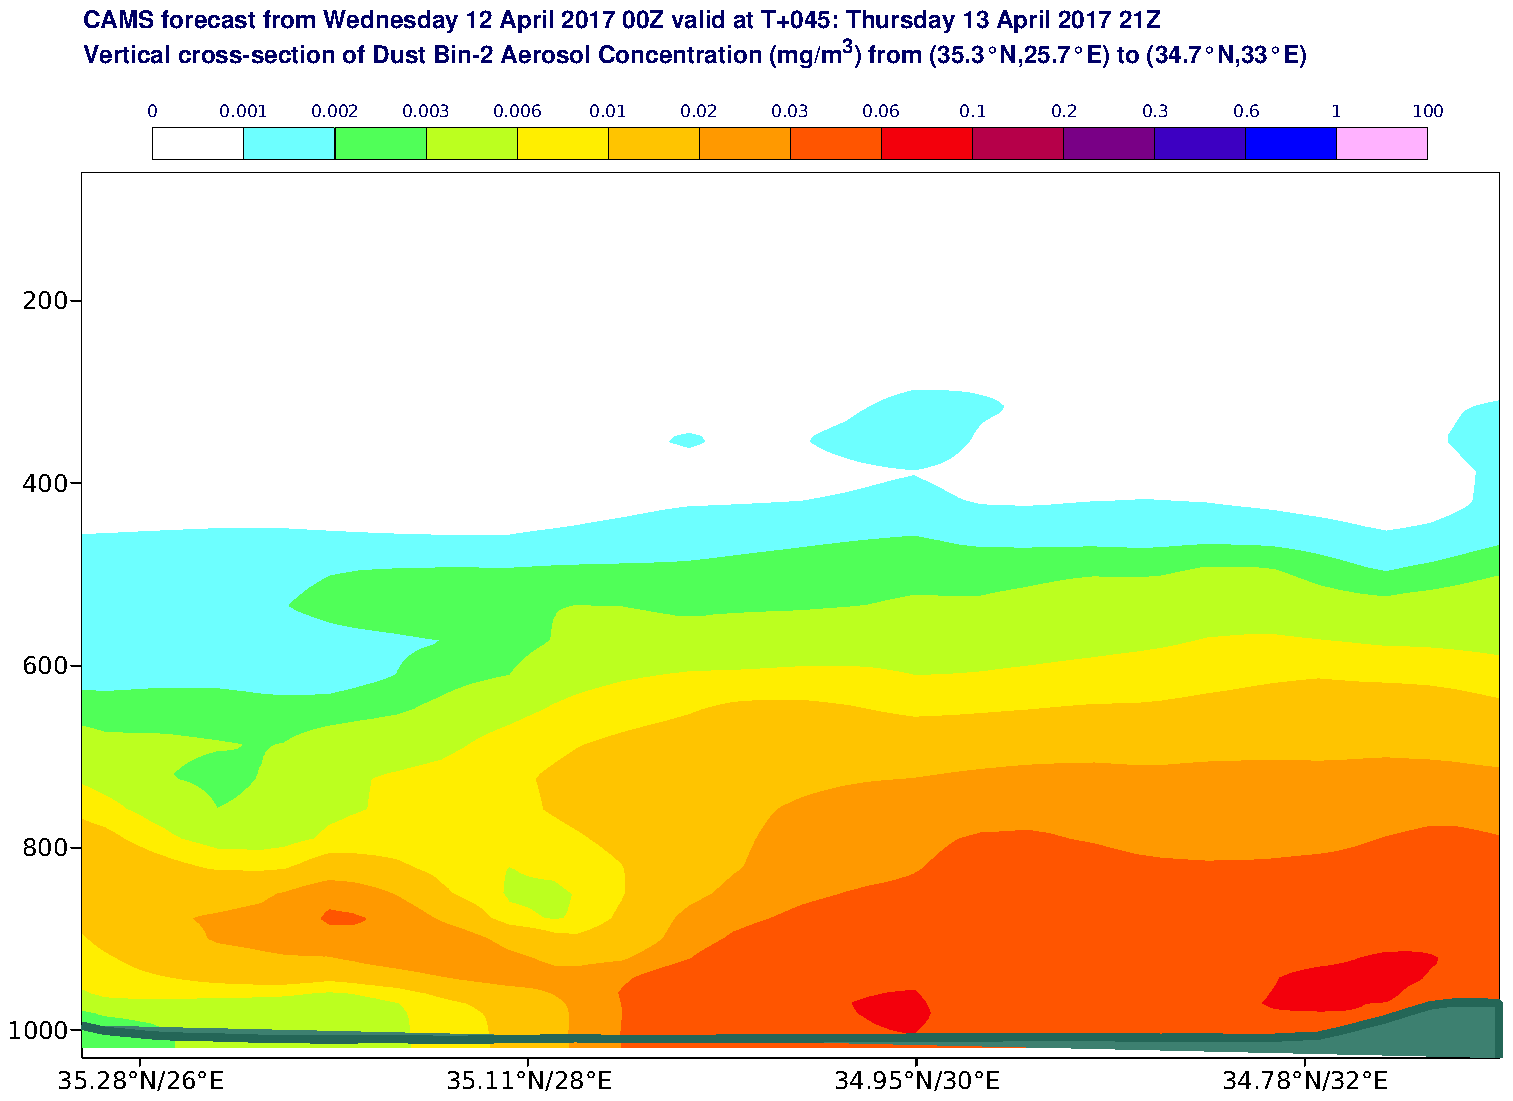 Vertical cross-section of Dust Bin-2 Aerosol Concentration (mg/m3) valid at T45 - 2017-04-13 21:00